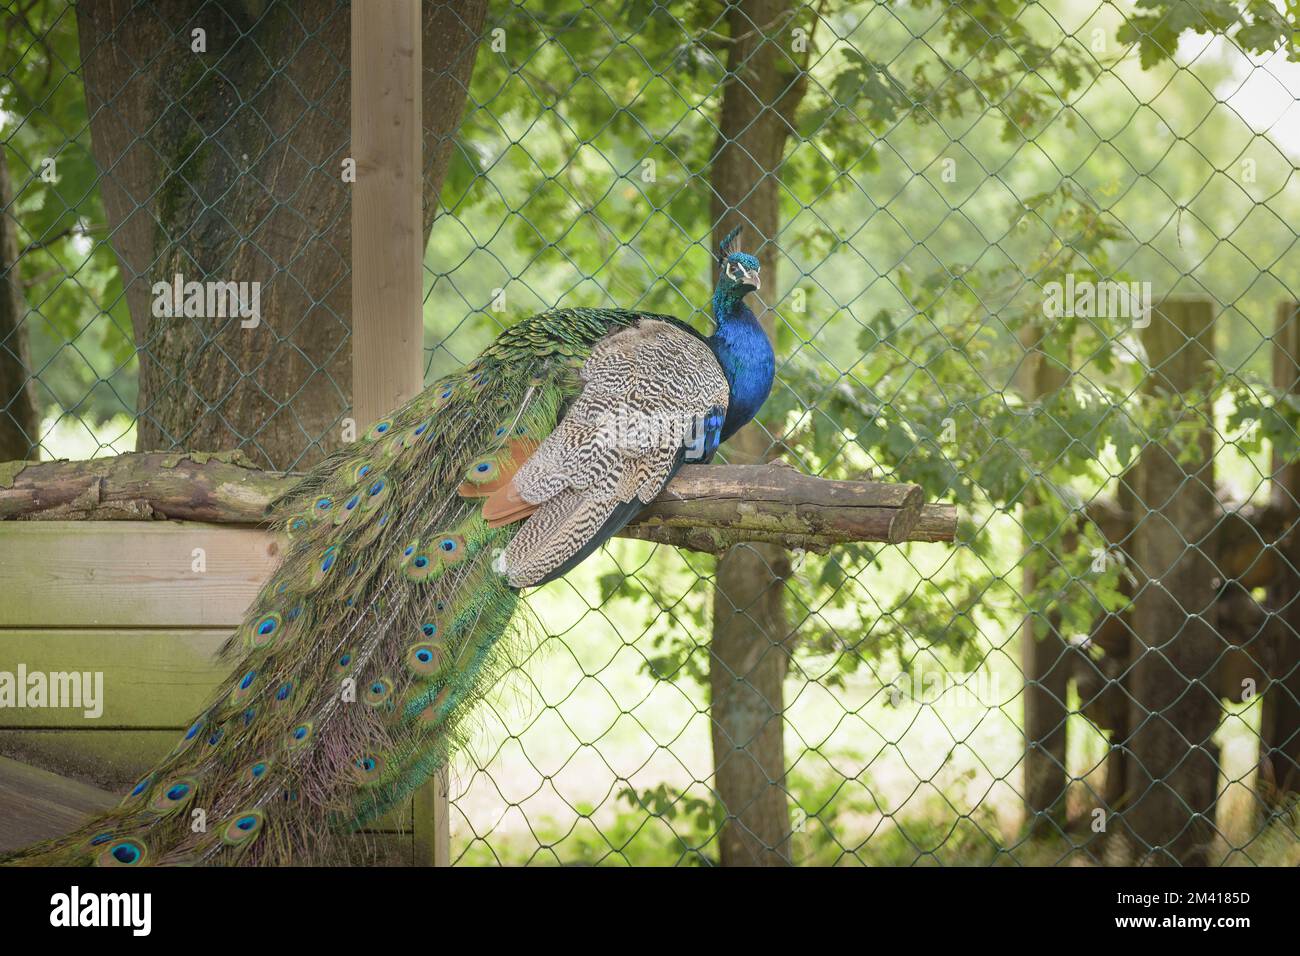 Peacock bird with a long tail, male Stock Photo